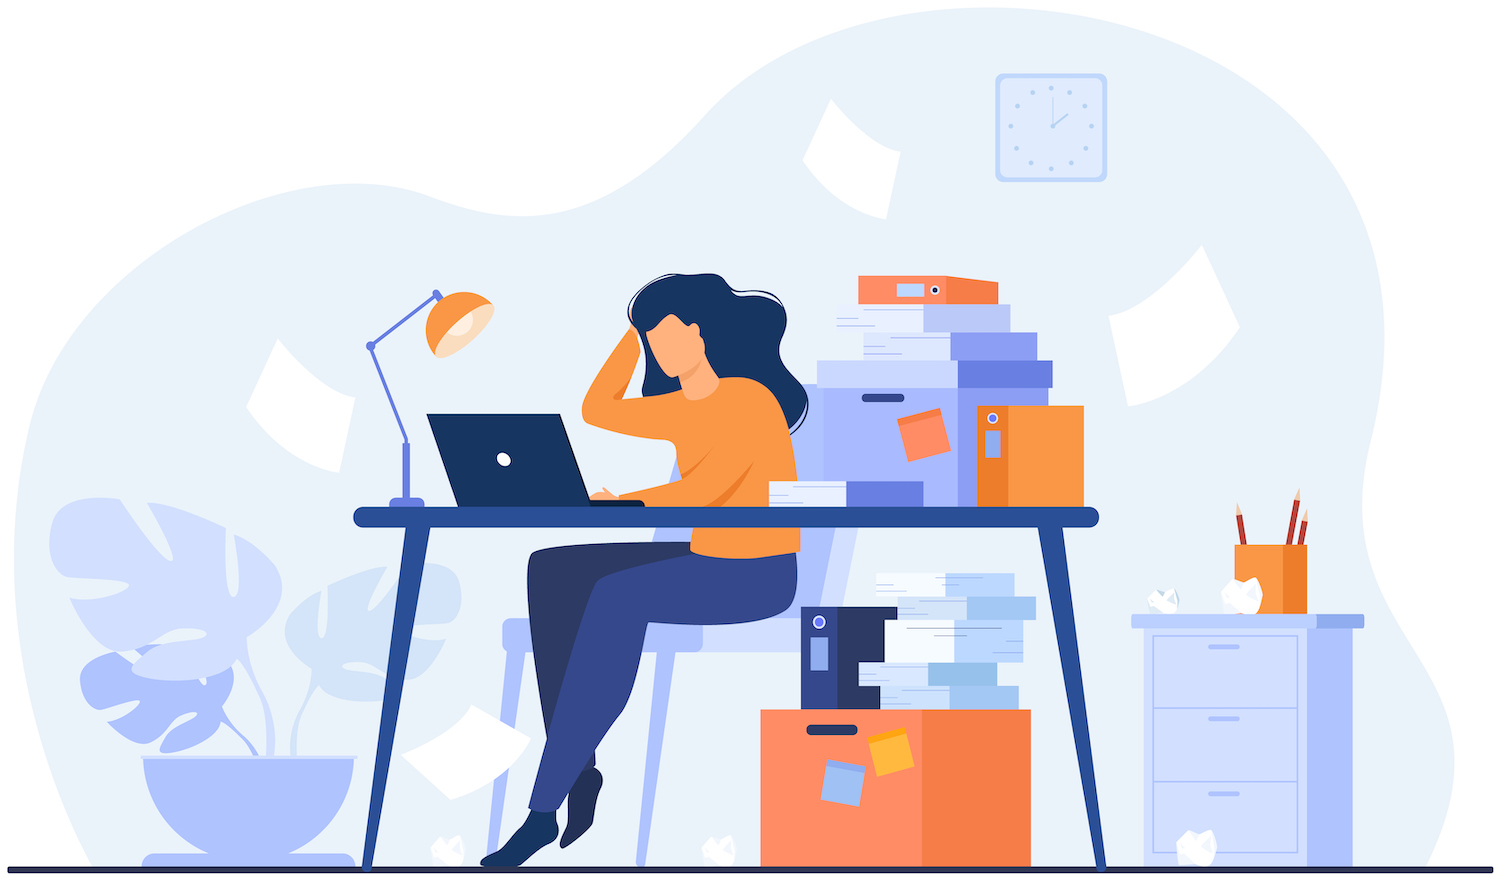 Illustration of woman working at laptop with piles of paper and files, and papers blowing about. Woman is holding hand to head, representing burnout. Designed by pch.vector / Freepik